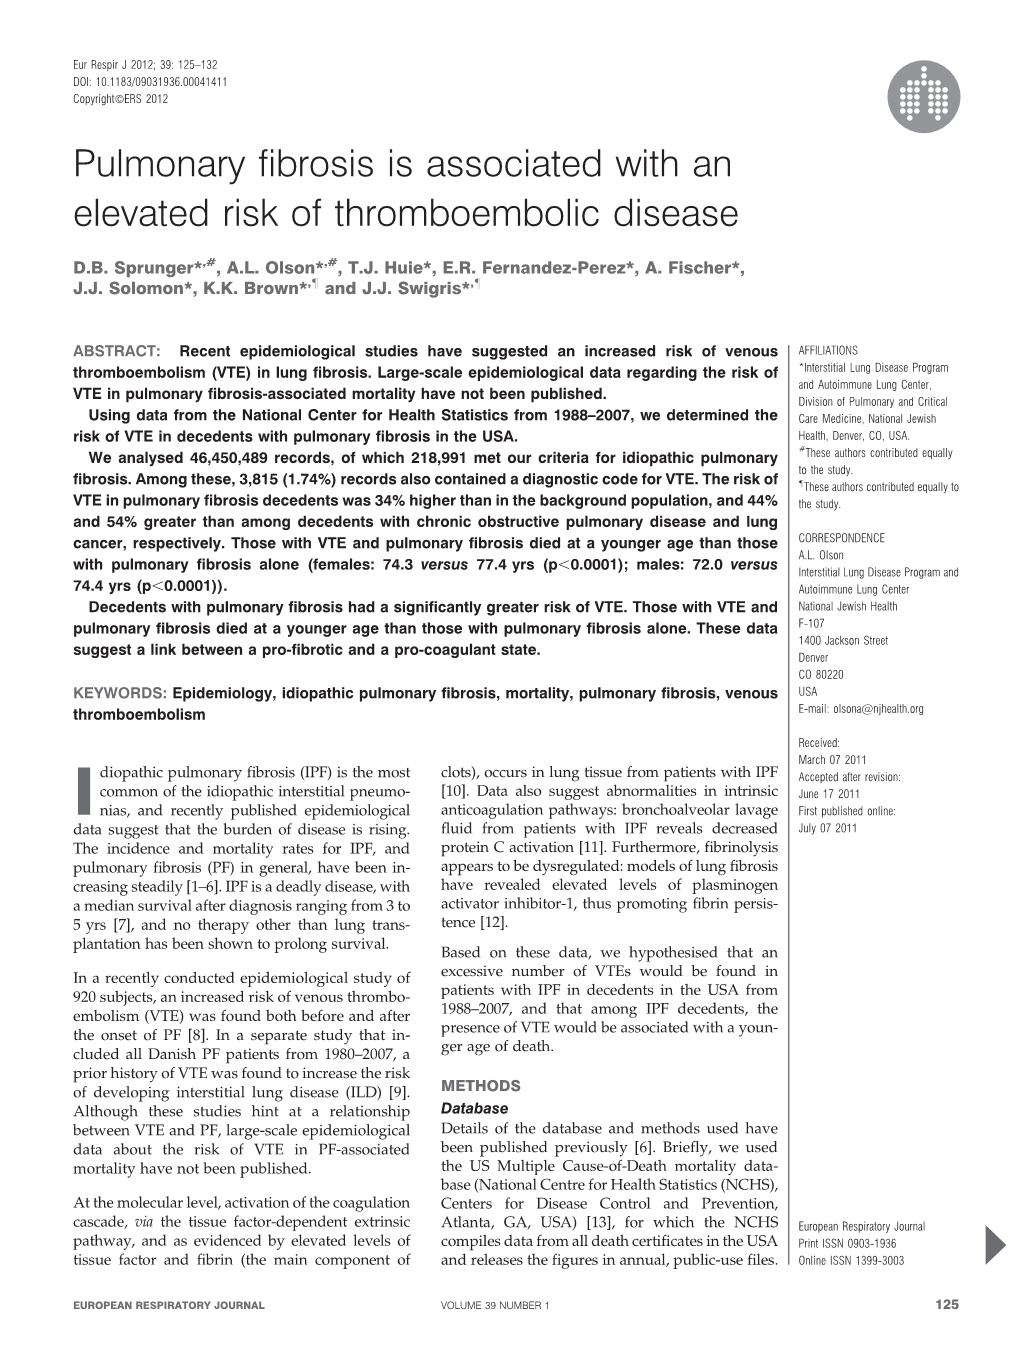 Pulmonary Fibrosis Is Associated with an Elevated Risk of Thromboembolic Disease